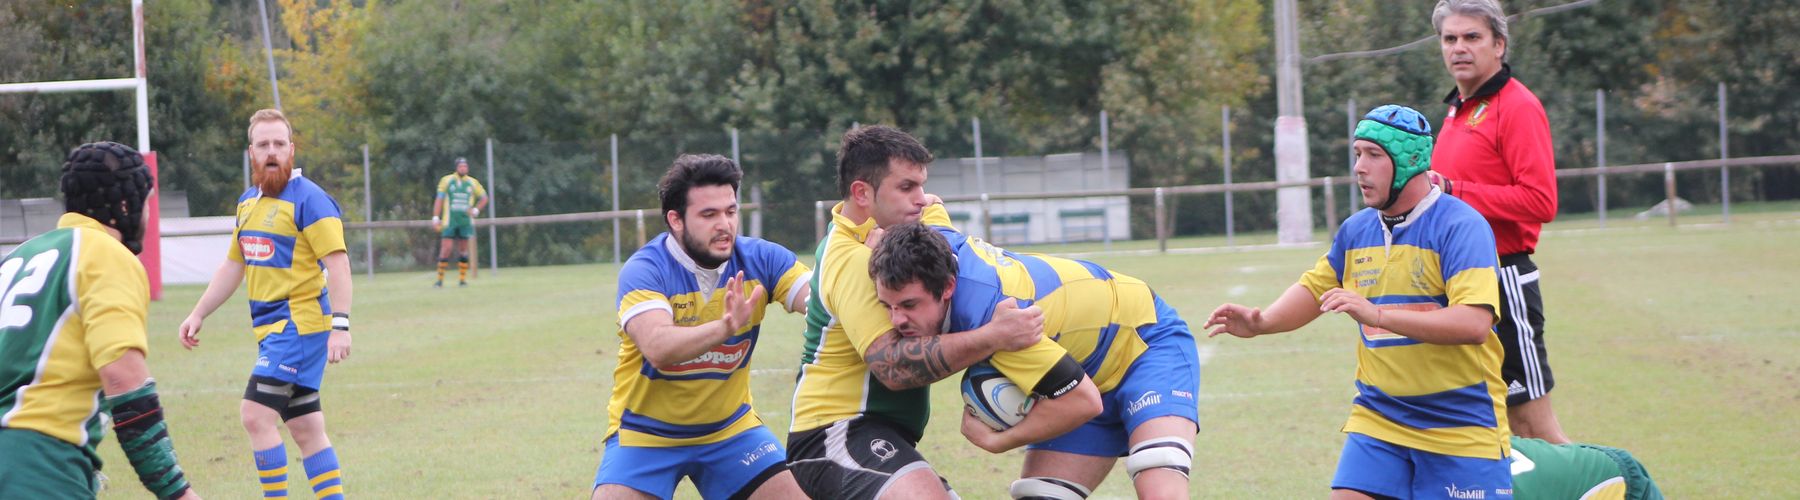 Rugby Frassinelle